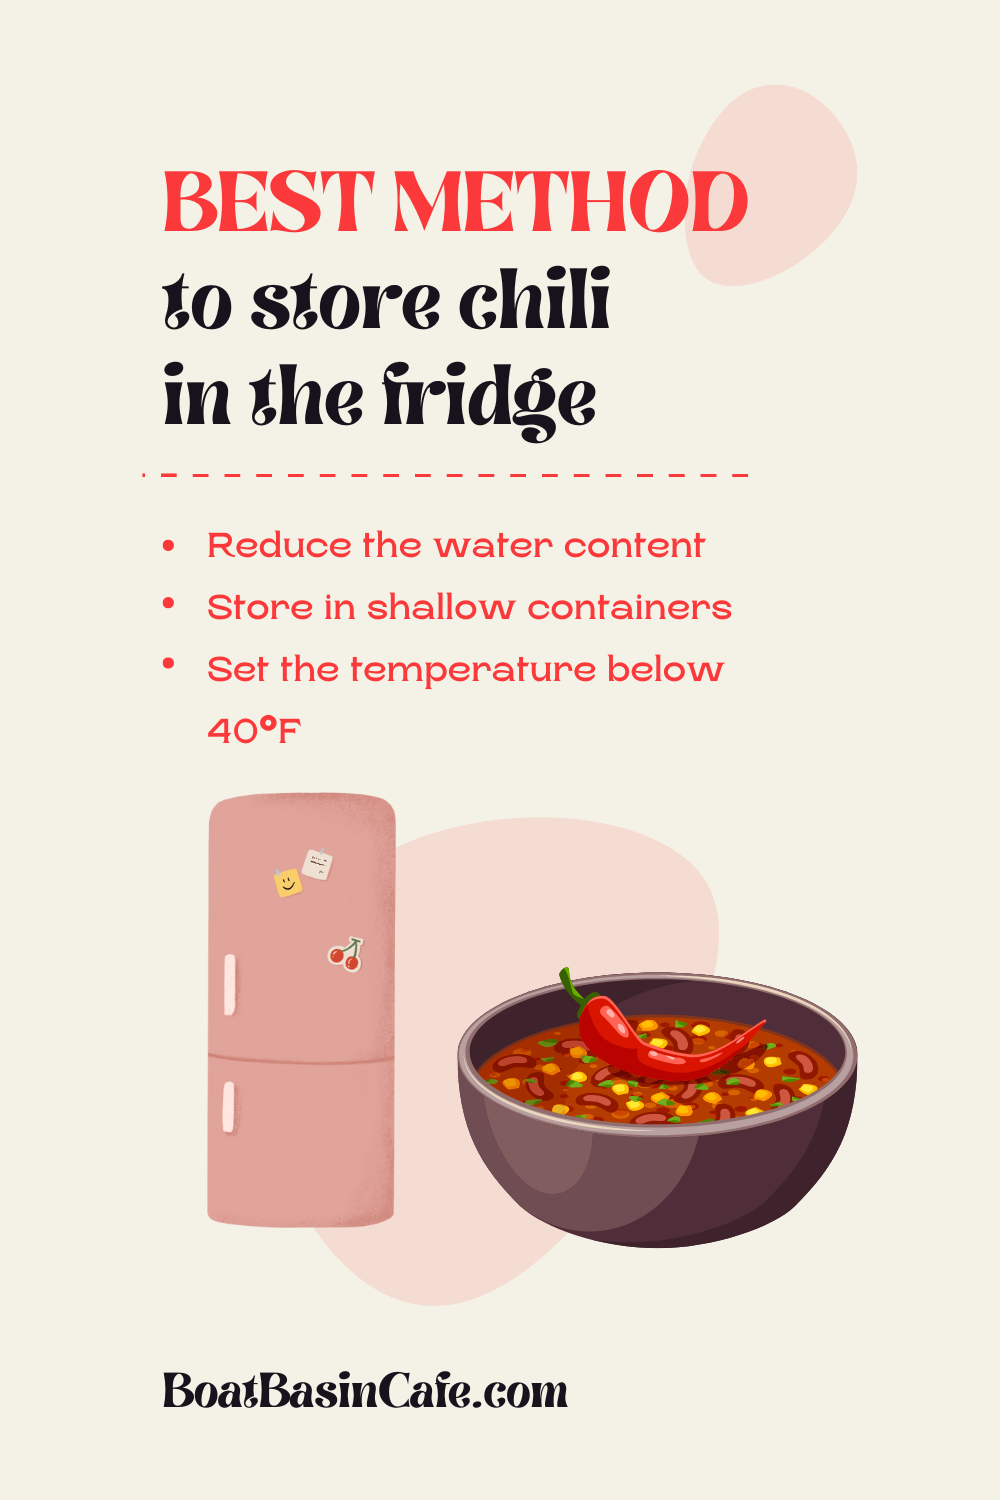 What are the best methods to store chili in the fridge?